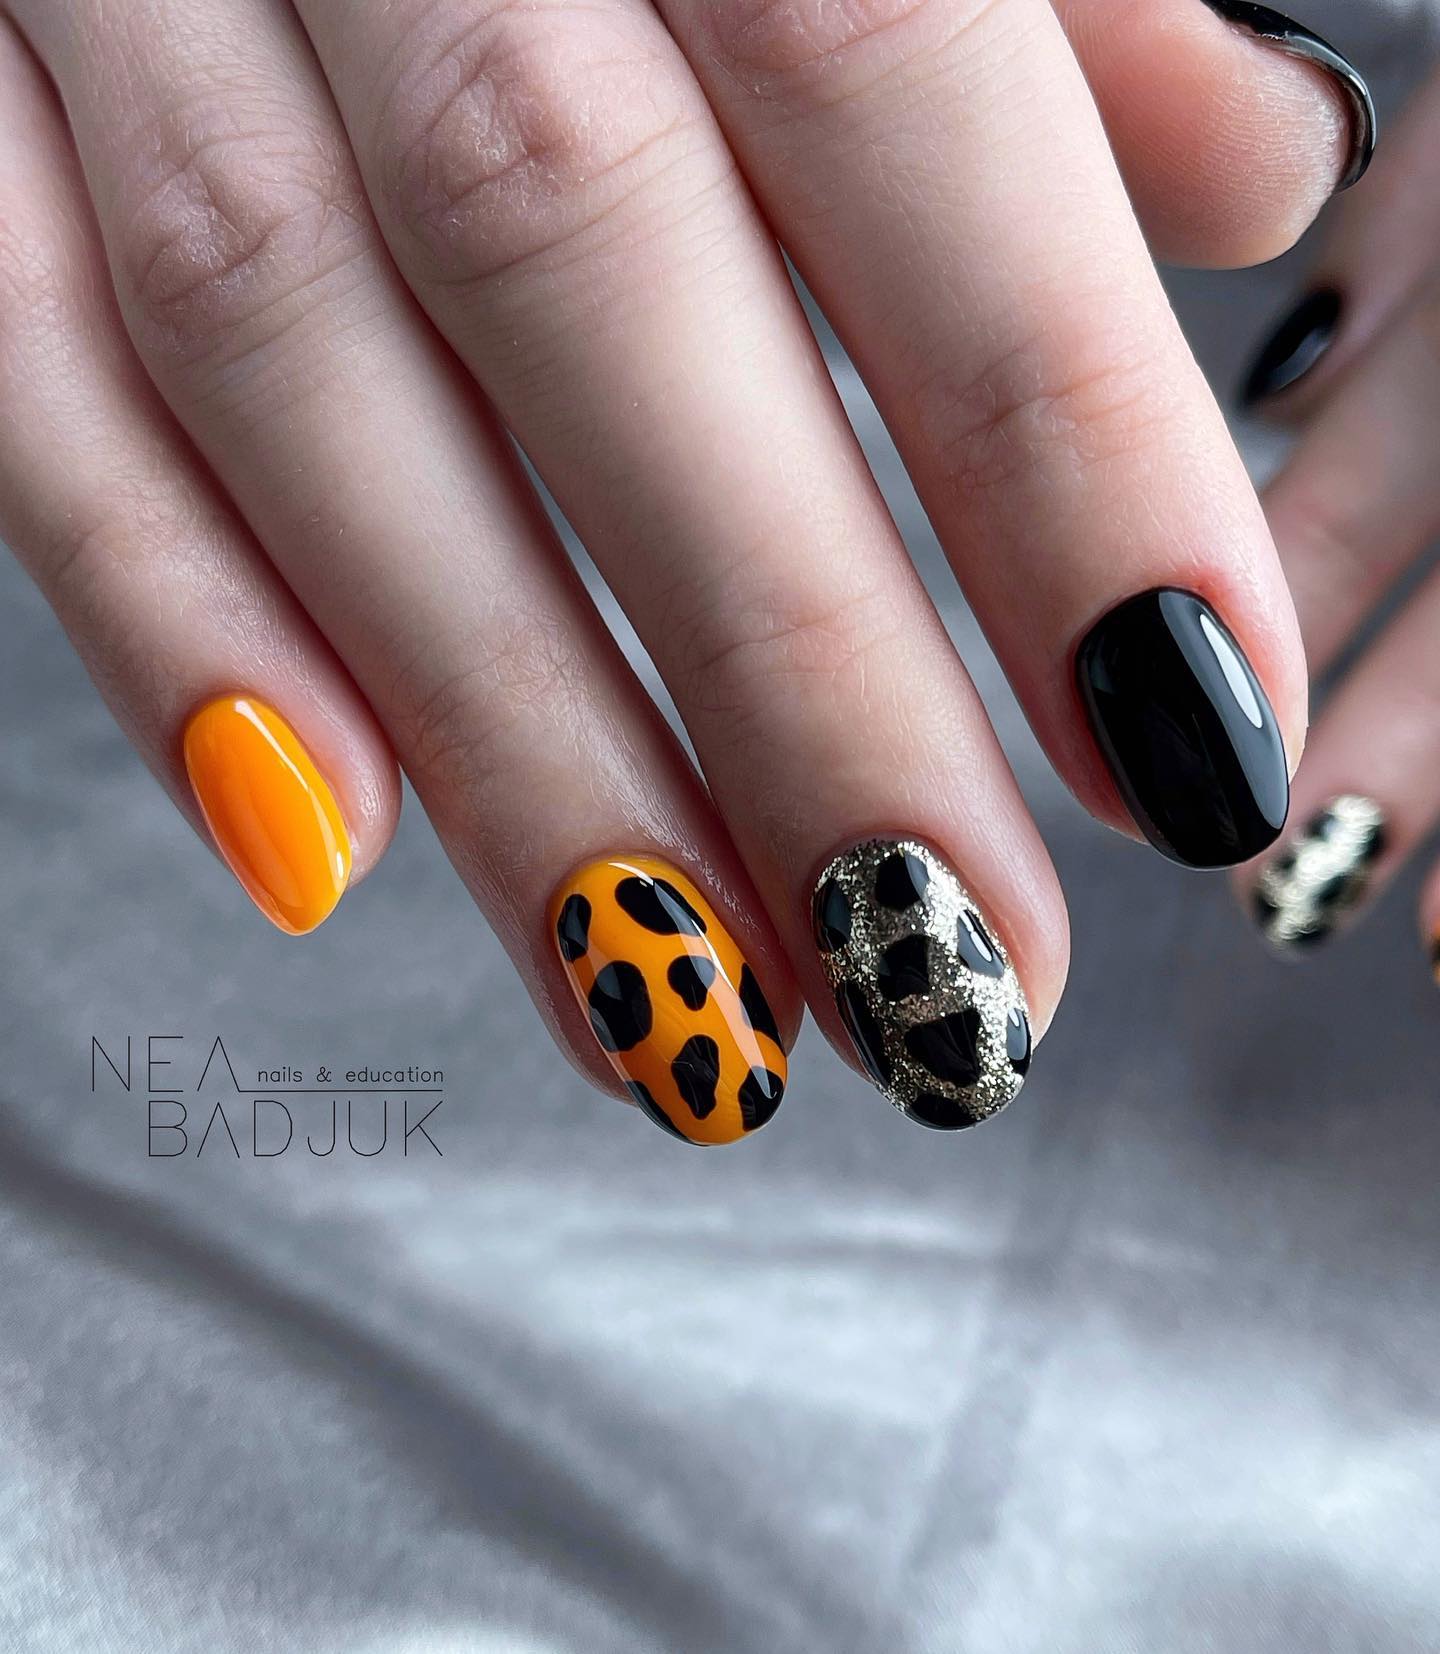 When it comes to choose one nail design, most women become indecisive and if you are one of those, don't feel alone. Among a wide variety of nail designs, choosing one design is super-hard! So, why not using a few of them in one nail design? Use a leopard print with black, orange and glittered nail polishes.